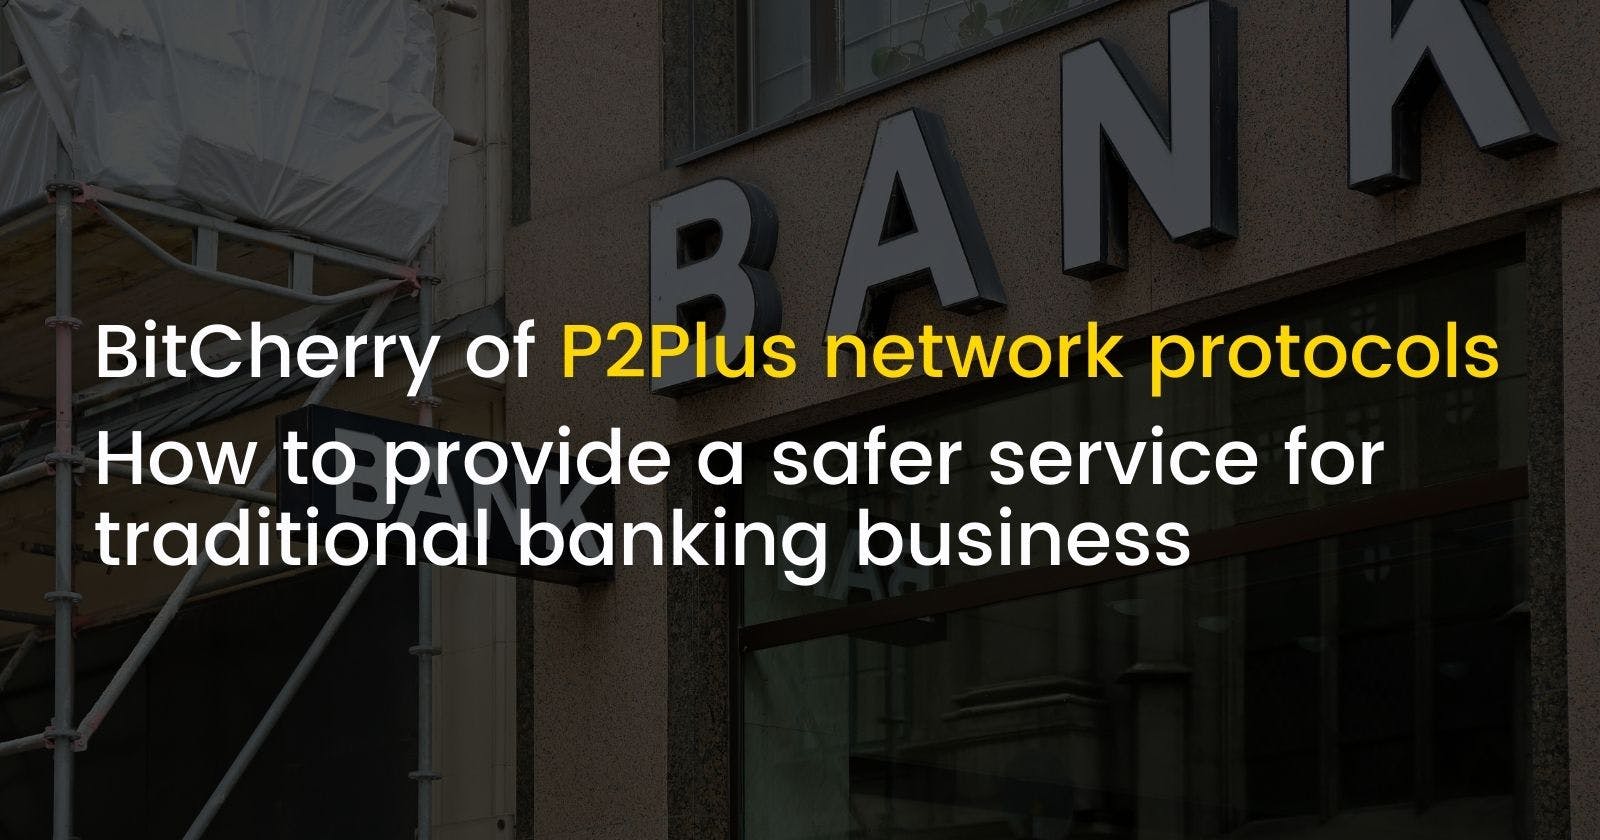 BitCherry of P2Plus network protocols how to provide a safer service for traditional banking business